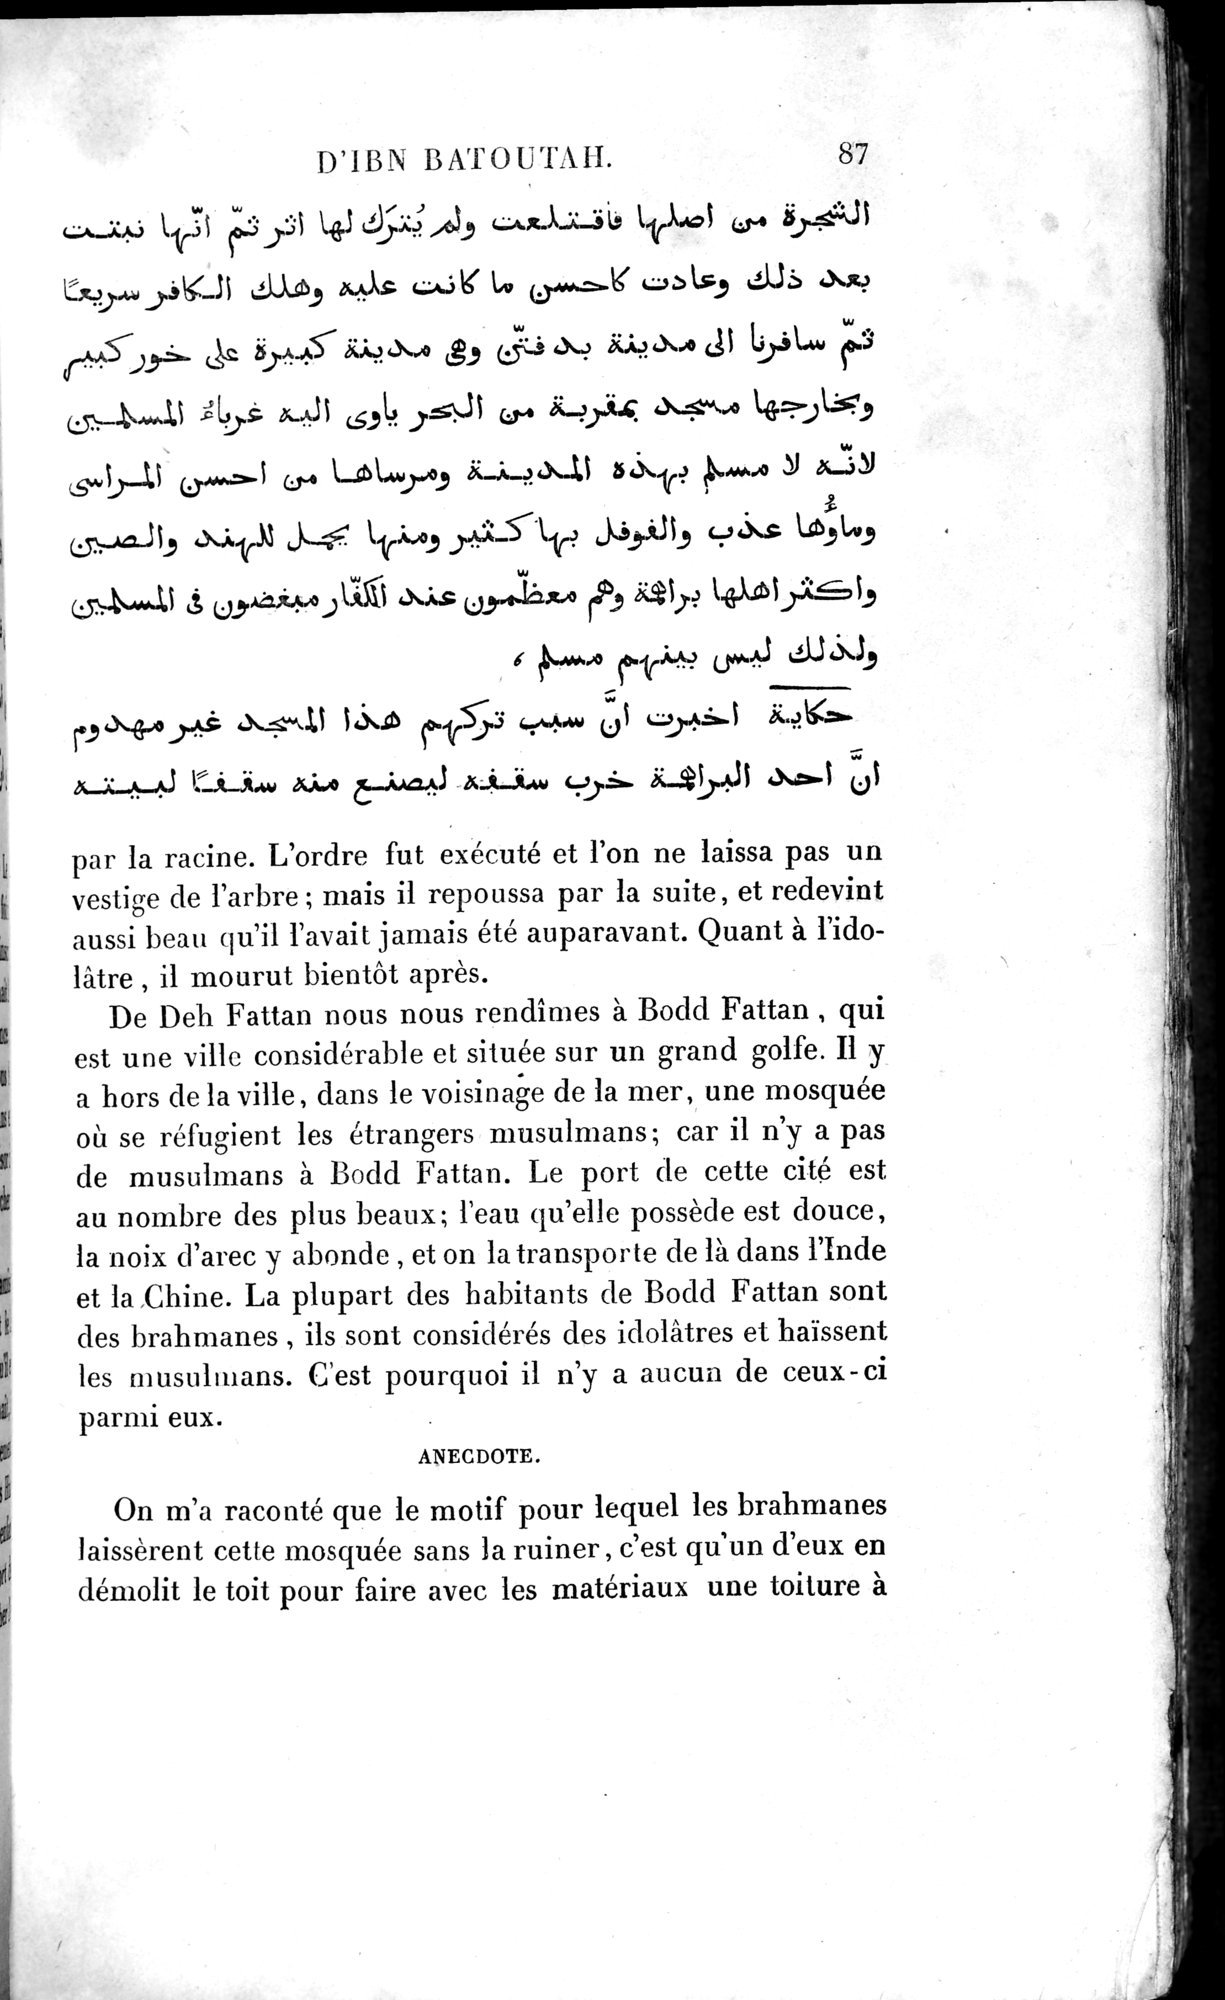 Voyages d'Ibn Batoutah : vol.4 / Page 99 (Grayscale High Resolution Image)